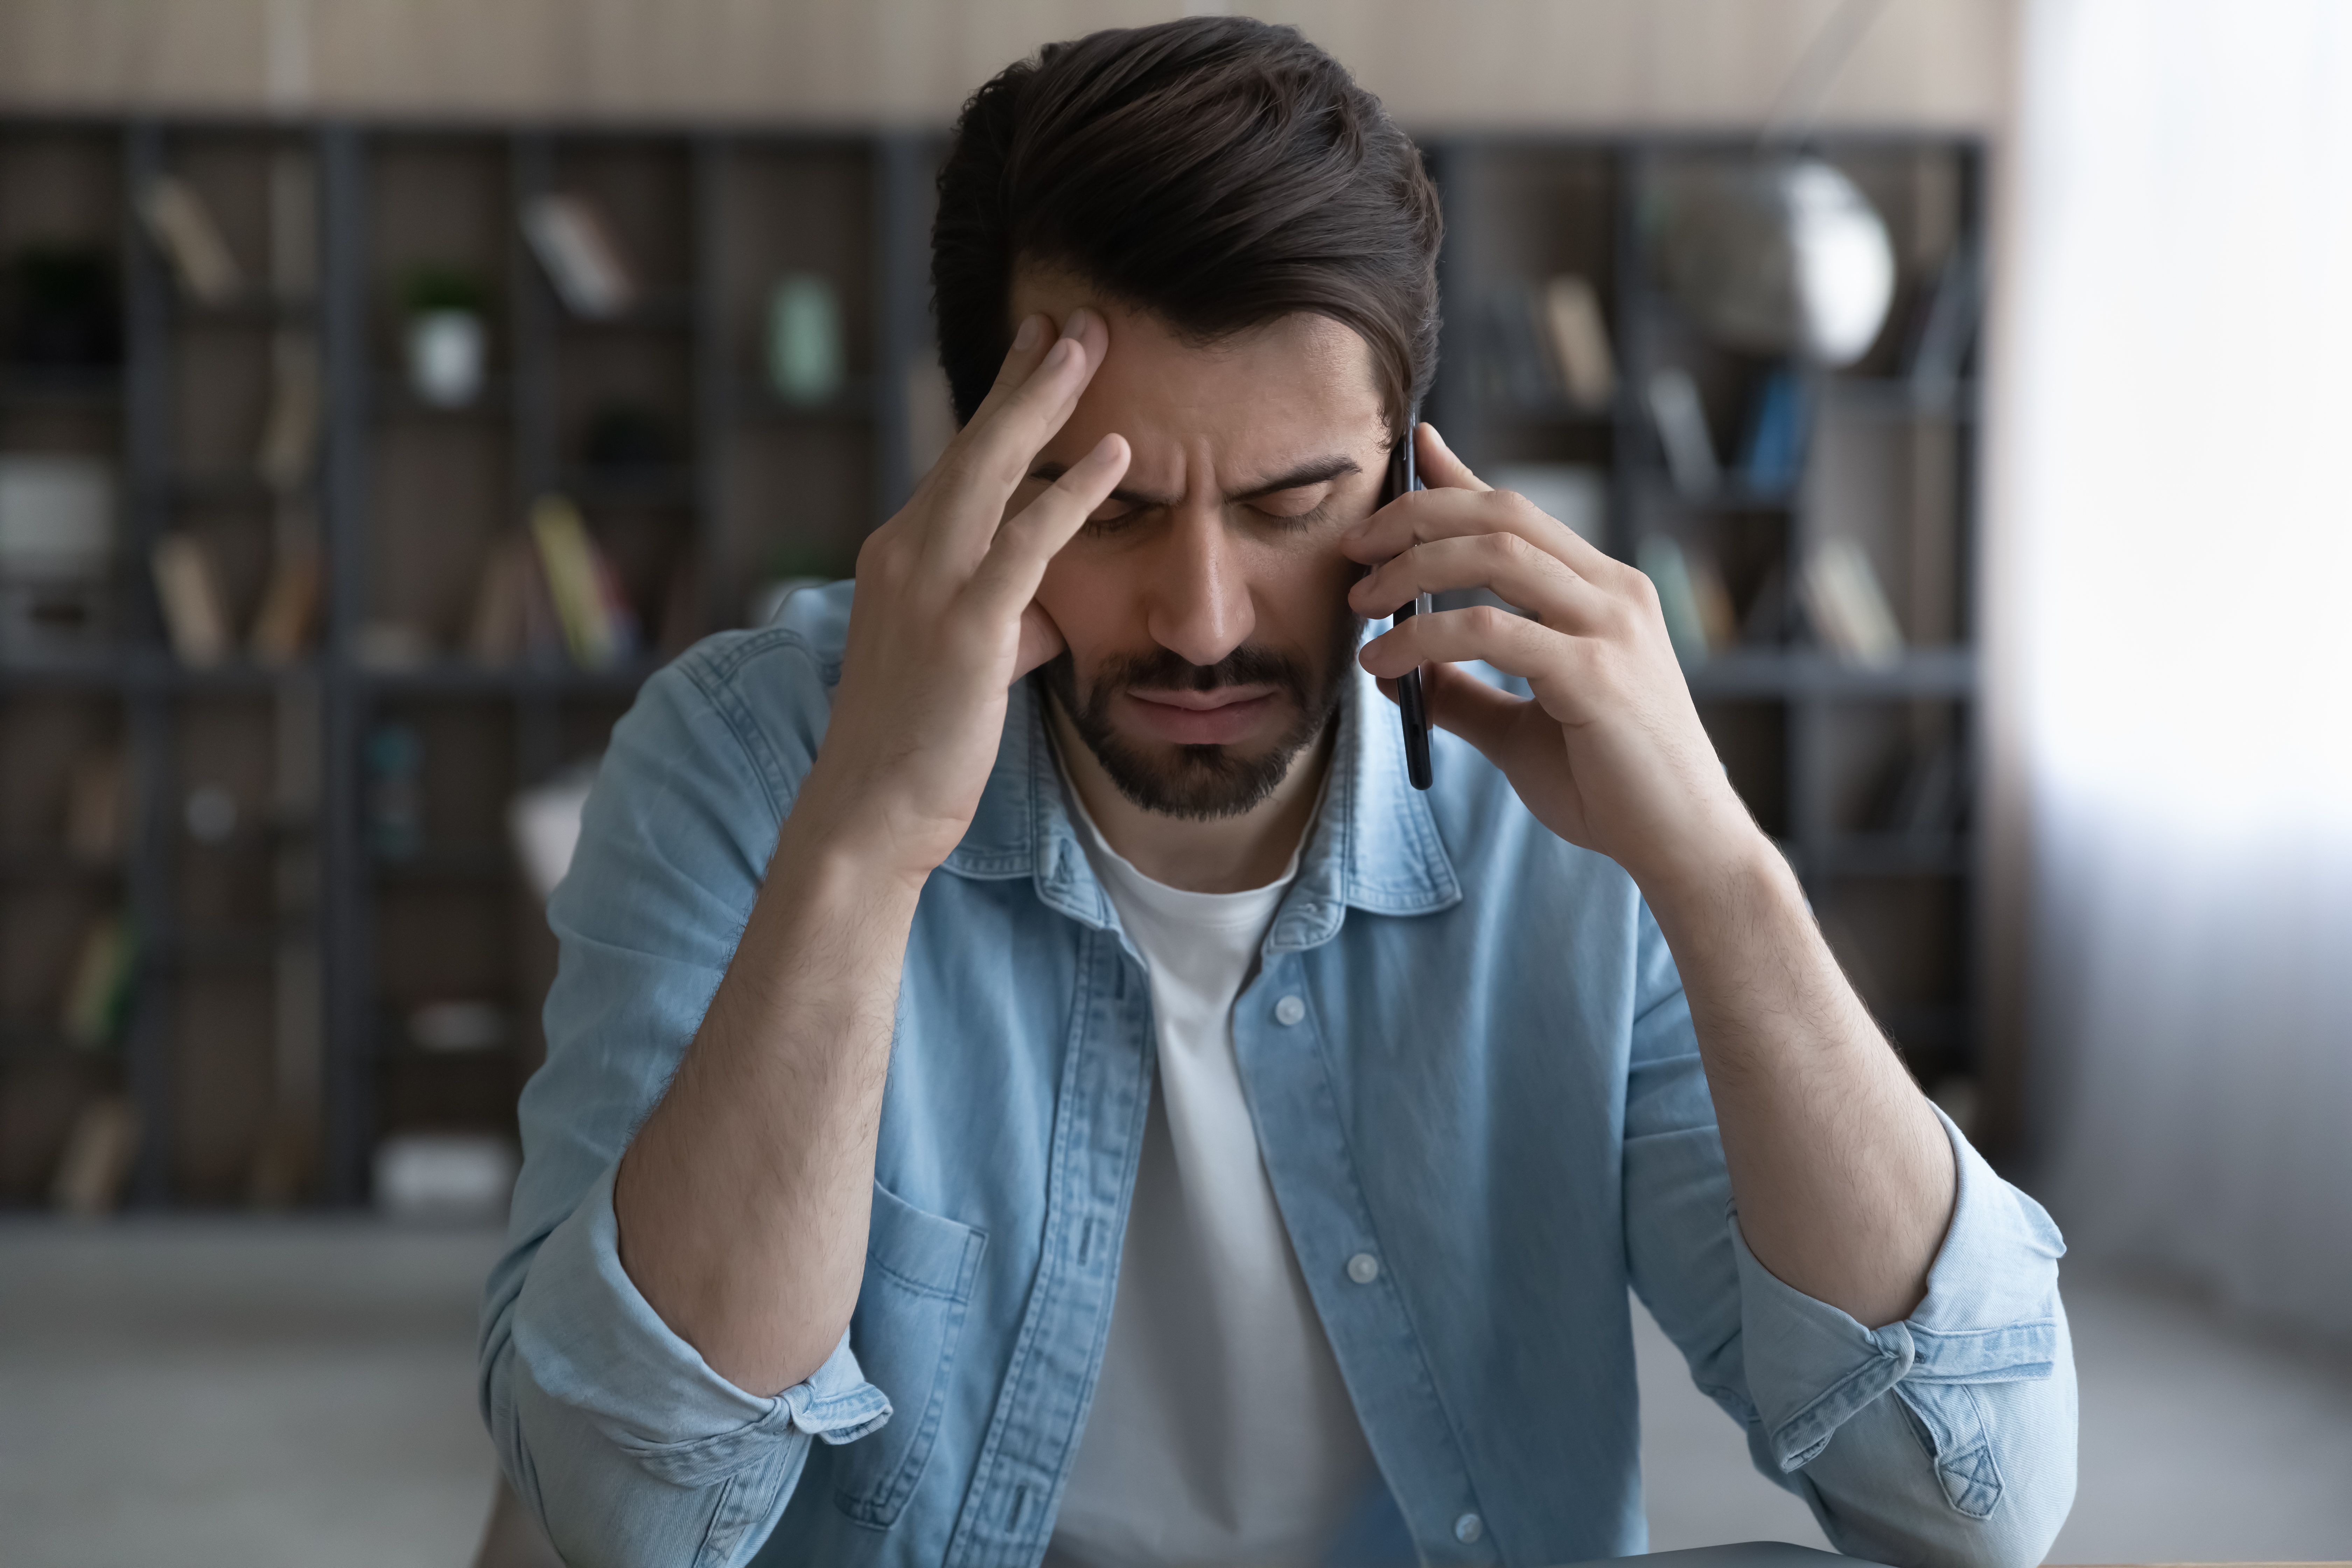 Stressed young man | Source: Shutterstock